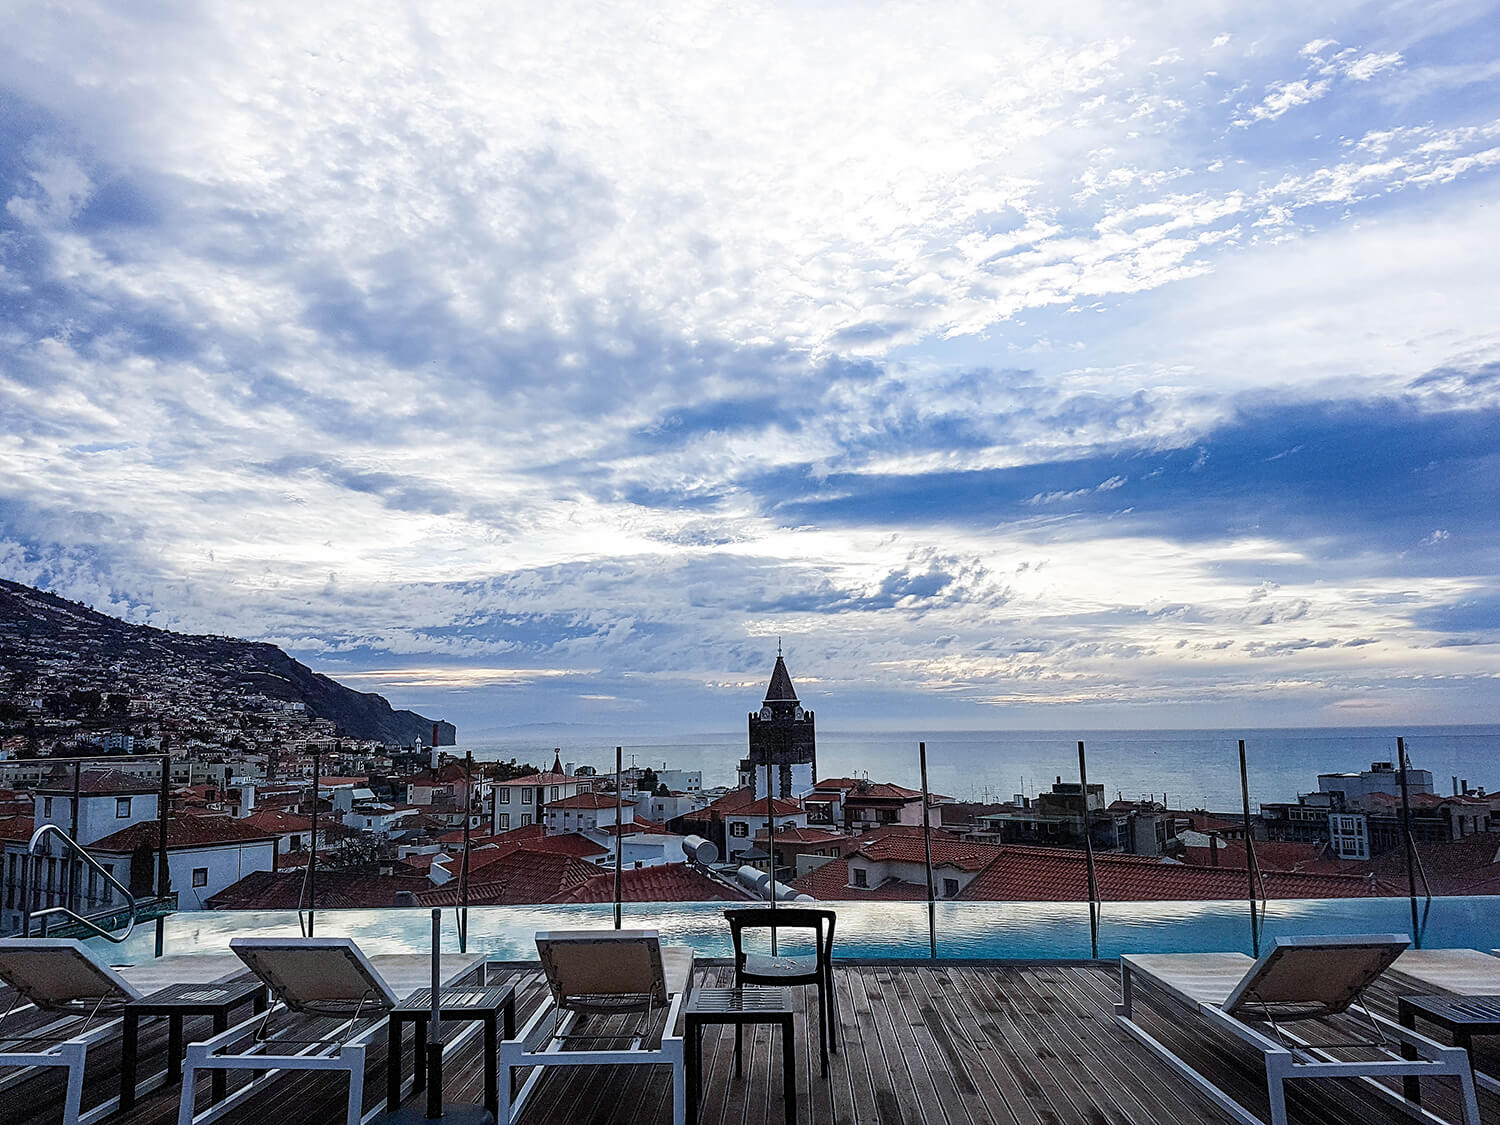 Kationette-travelblogger-nrw-Hotel-Tip-Castanheiro-Boutique-Hotel-in-Funchal-Old-Town-Madeira